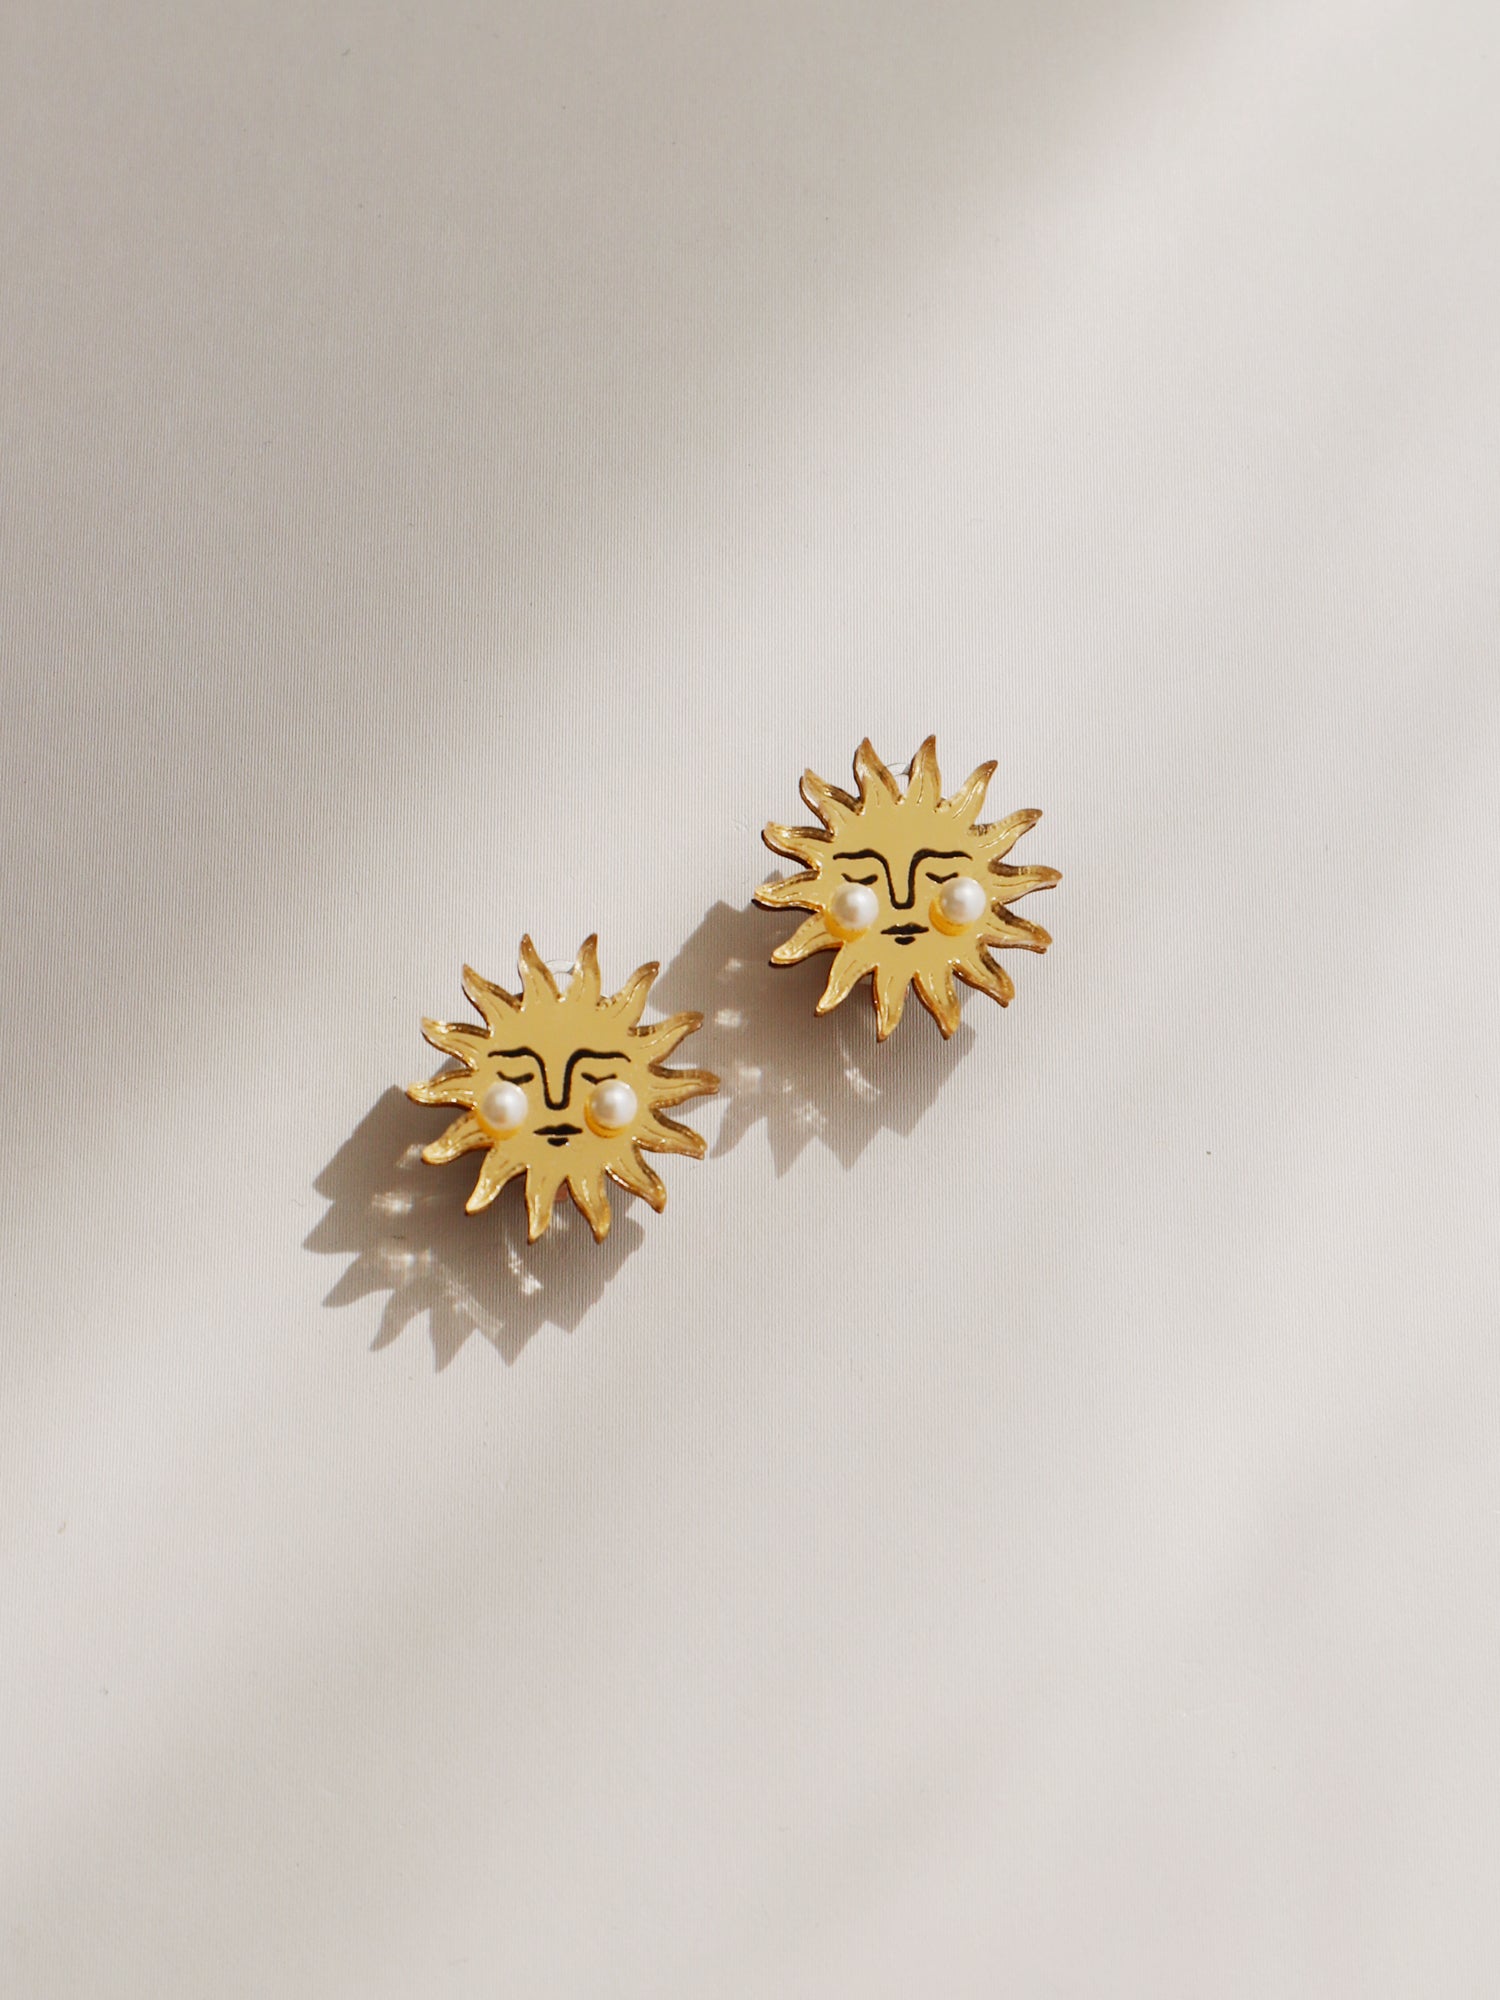 Sun Studs. Earrings made with laser cut acrylic, Czech glass pearls and hand inked details. Handmade in the UK by Wolf & Moon.